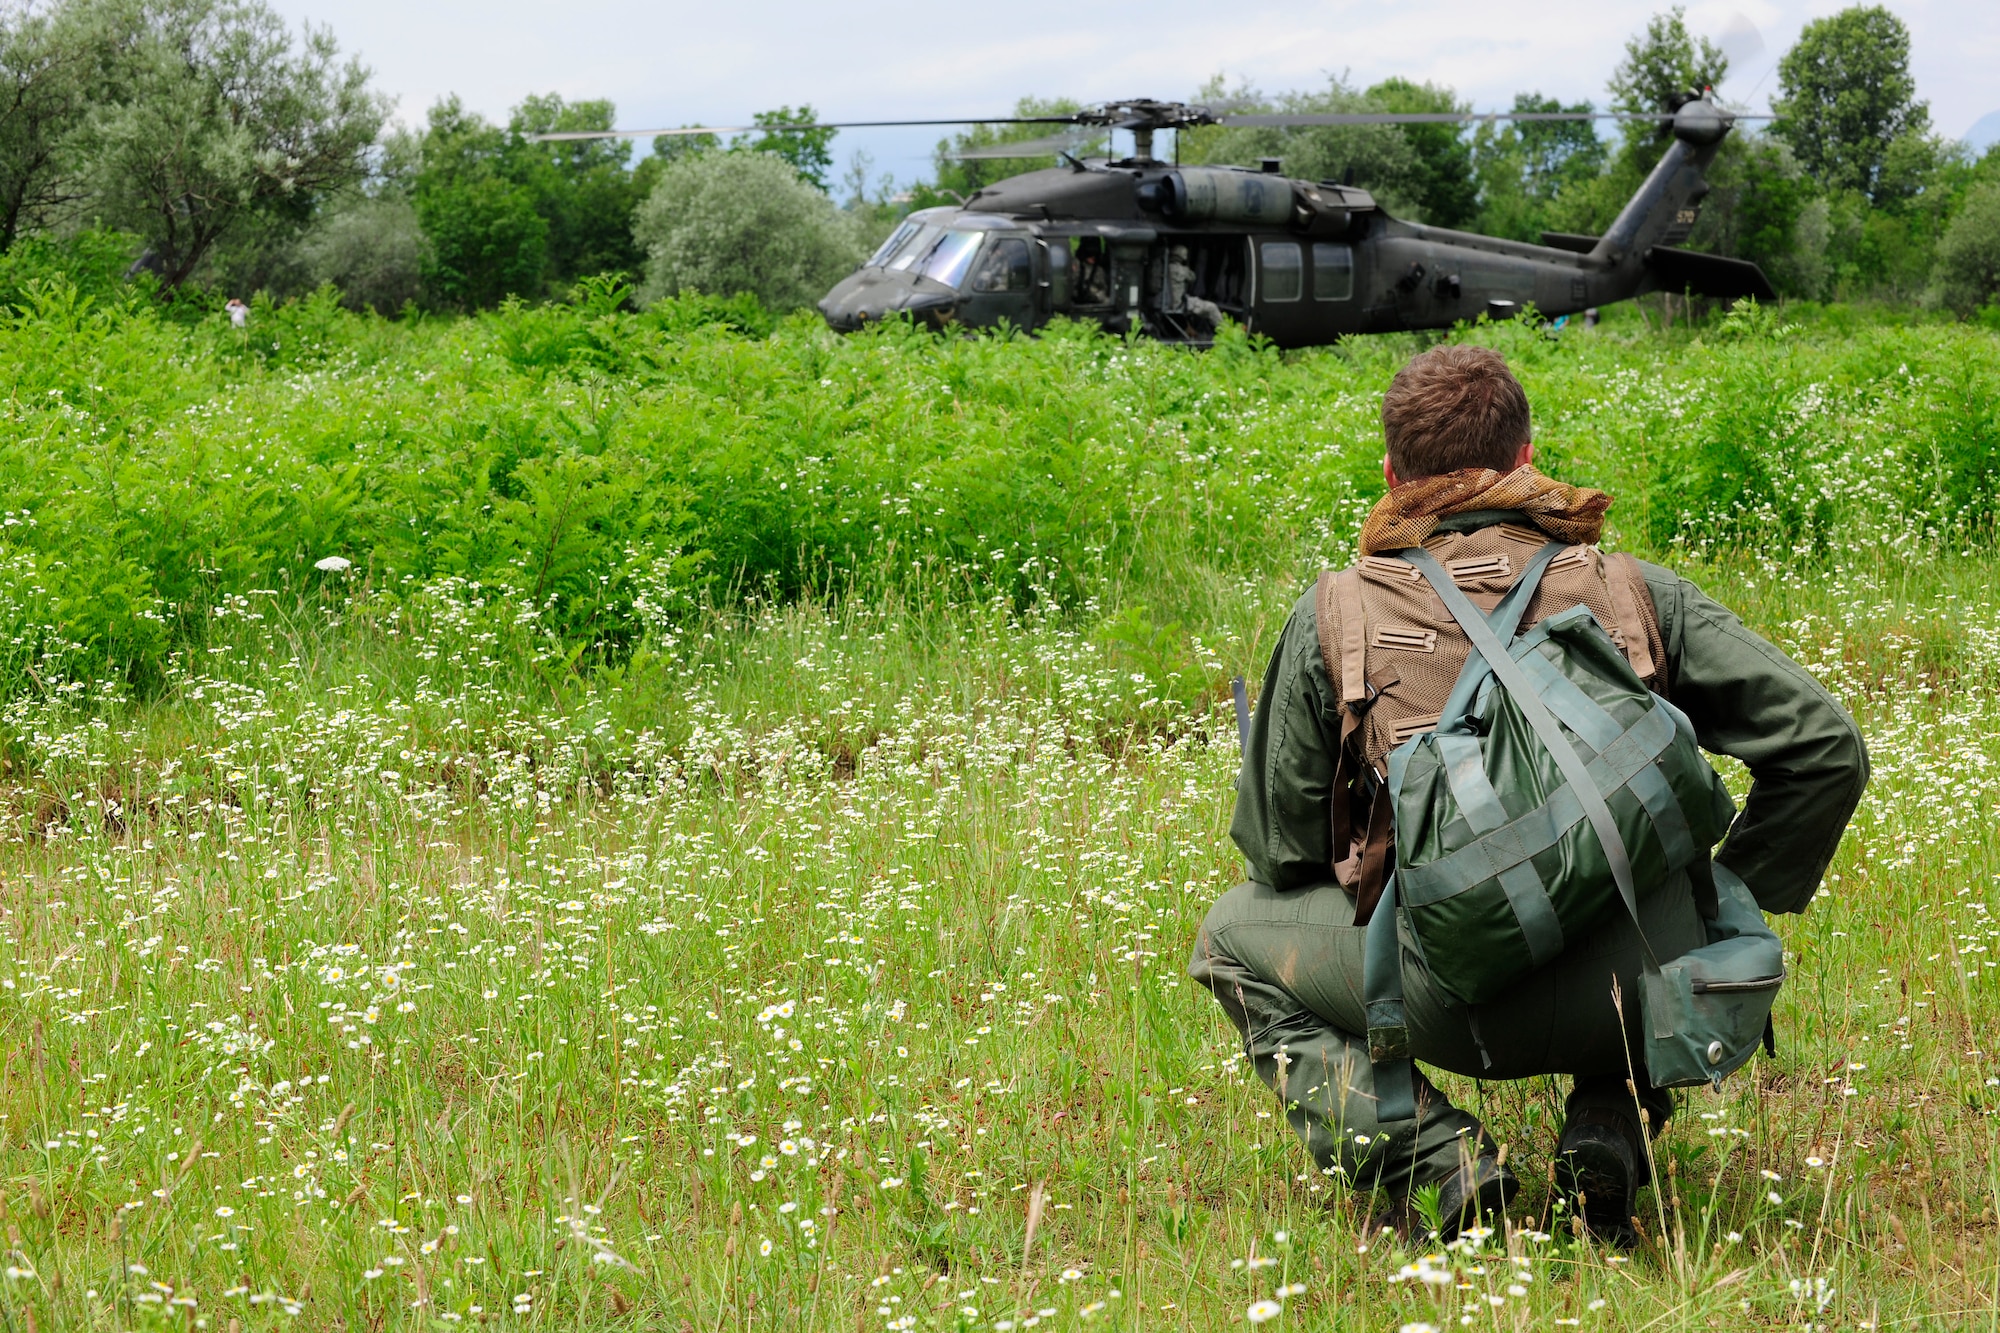 Capt. William Flynt  waits for a UH-60 Black Hawk helicopter during a combat search and rescue training mission, June 24, 2014, at Cellina Meduna training ground near Maniago, Italy. Pilots are taught necessary survival skills to evade capture and get recovered successfully to include: movement, camouflage and signaling techniques. Flynt is a F-16 Fighting Falcon pilot with the 555th Fighter Squadron. (U.S. Air Force photo/Airman 1st Class Ryan Conroy)